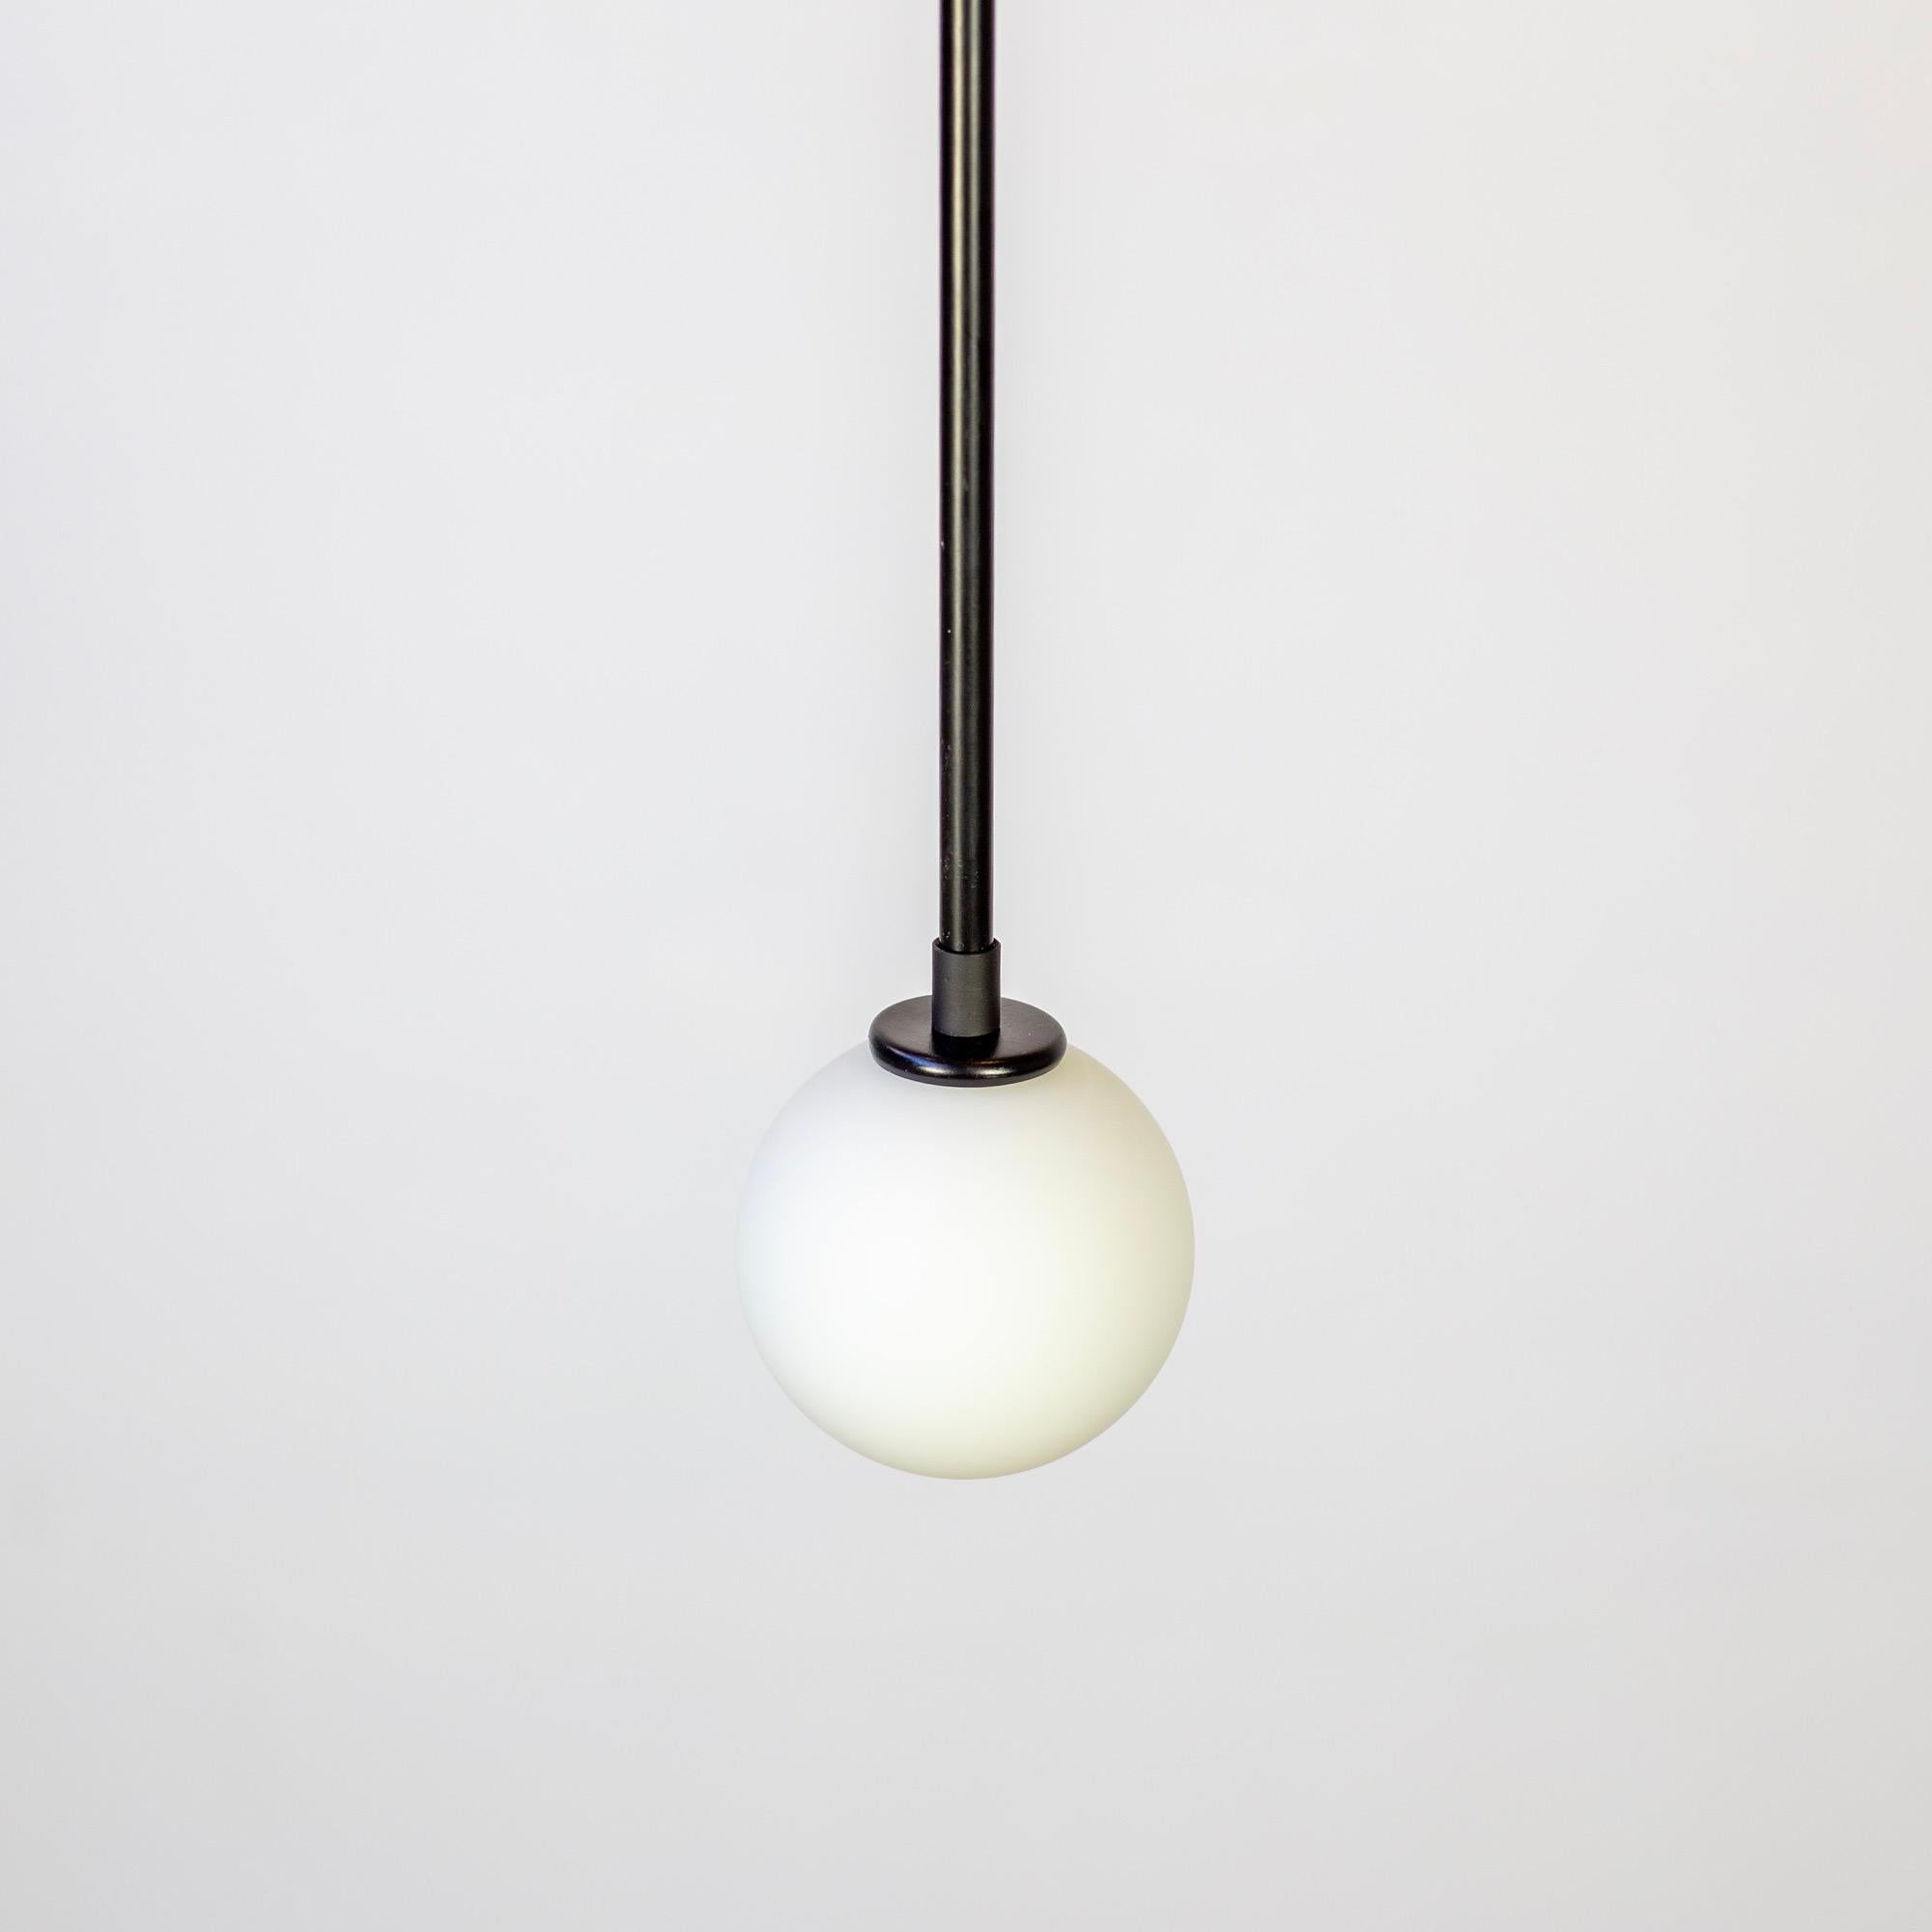 Powder-Coated Ball Pendant by Research.Lighting, Black, Made to Order For Sale